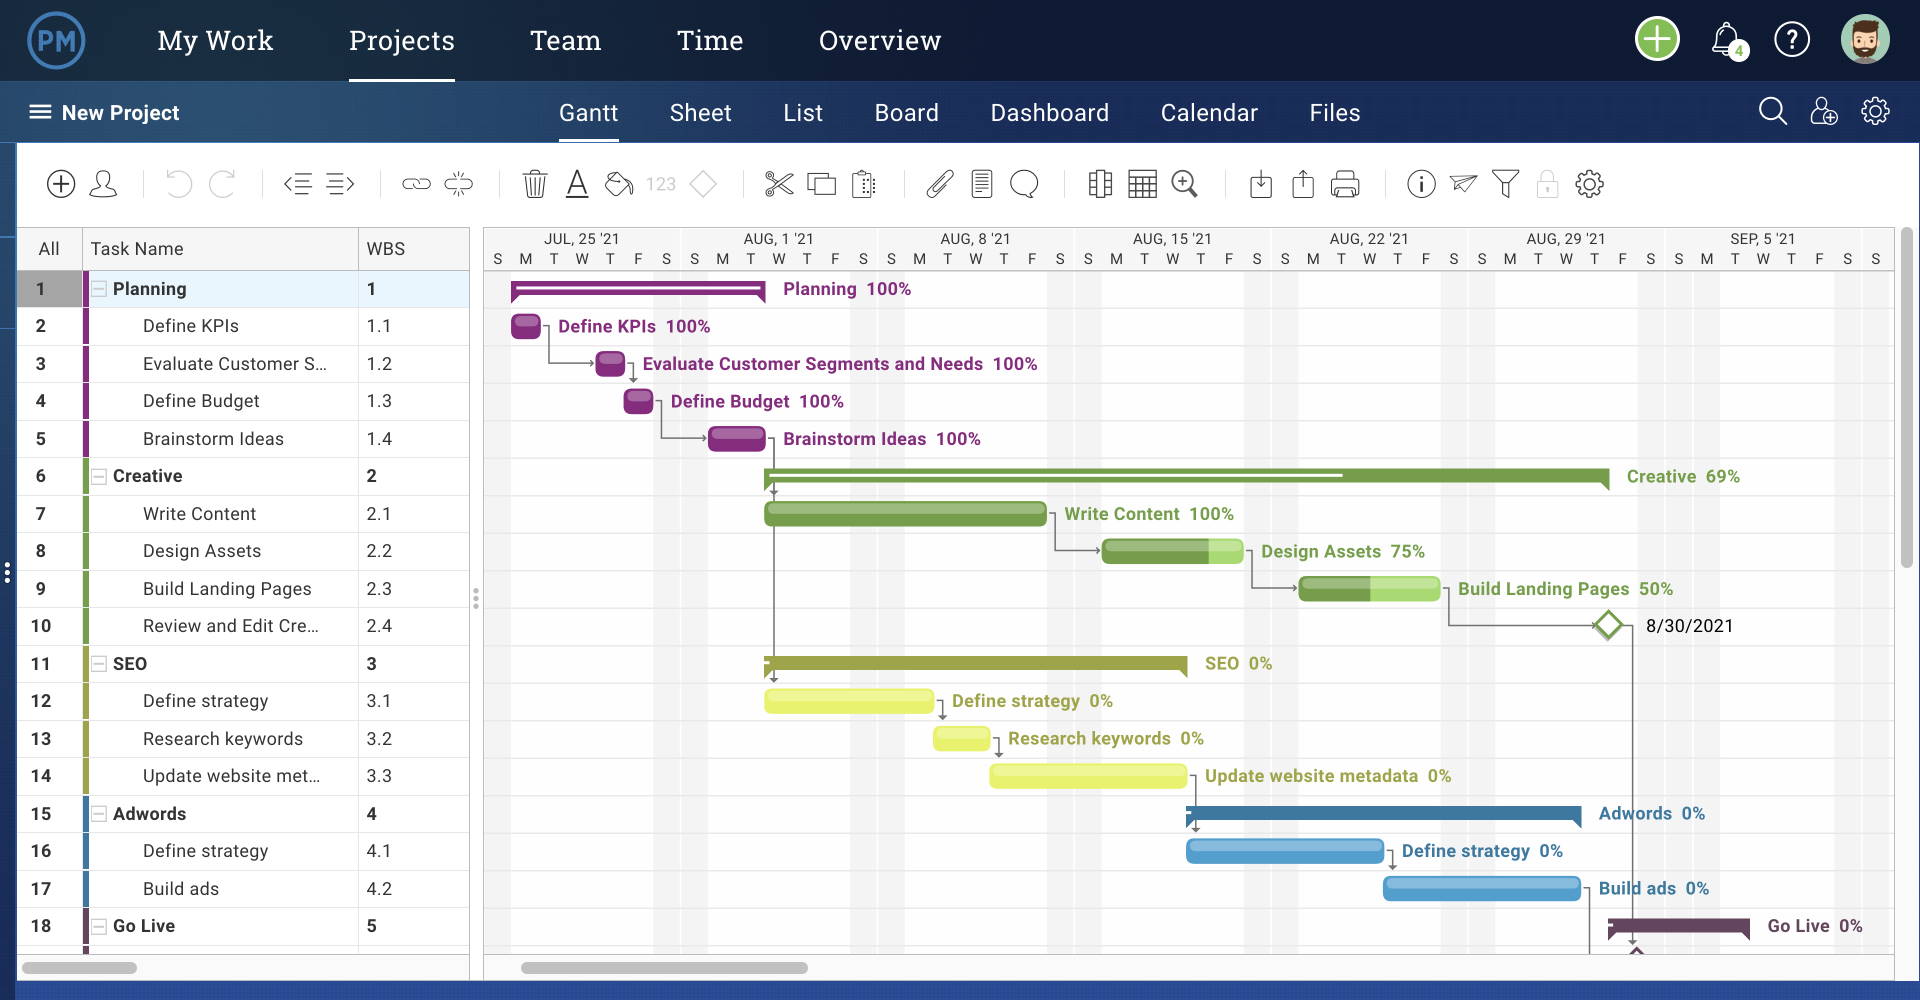 gantt chart with schedule for analyzing business performance